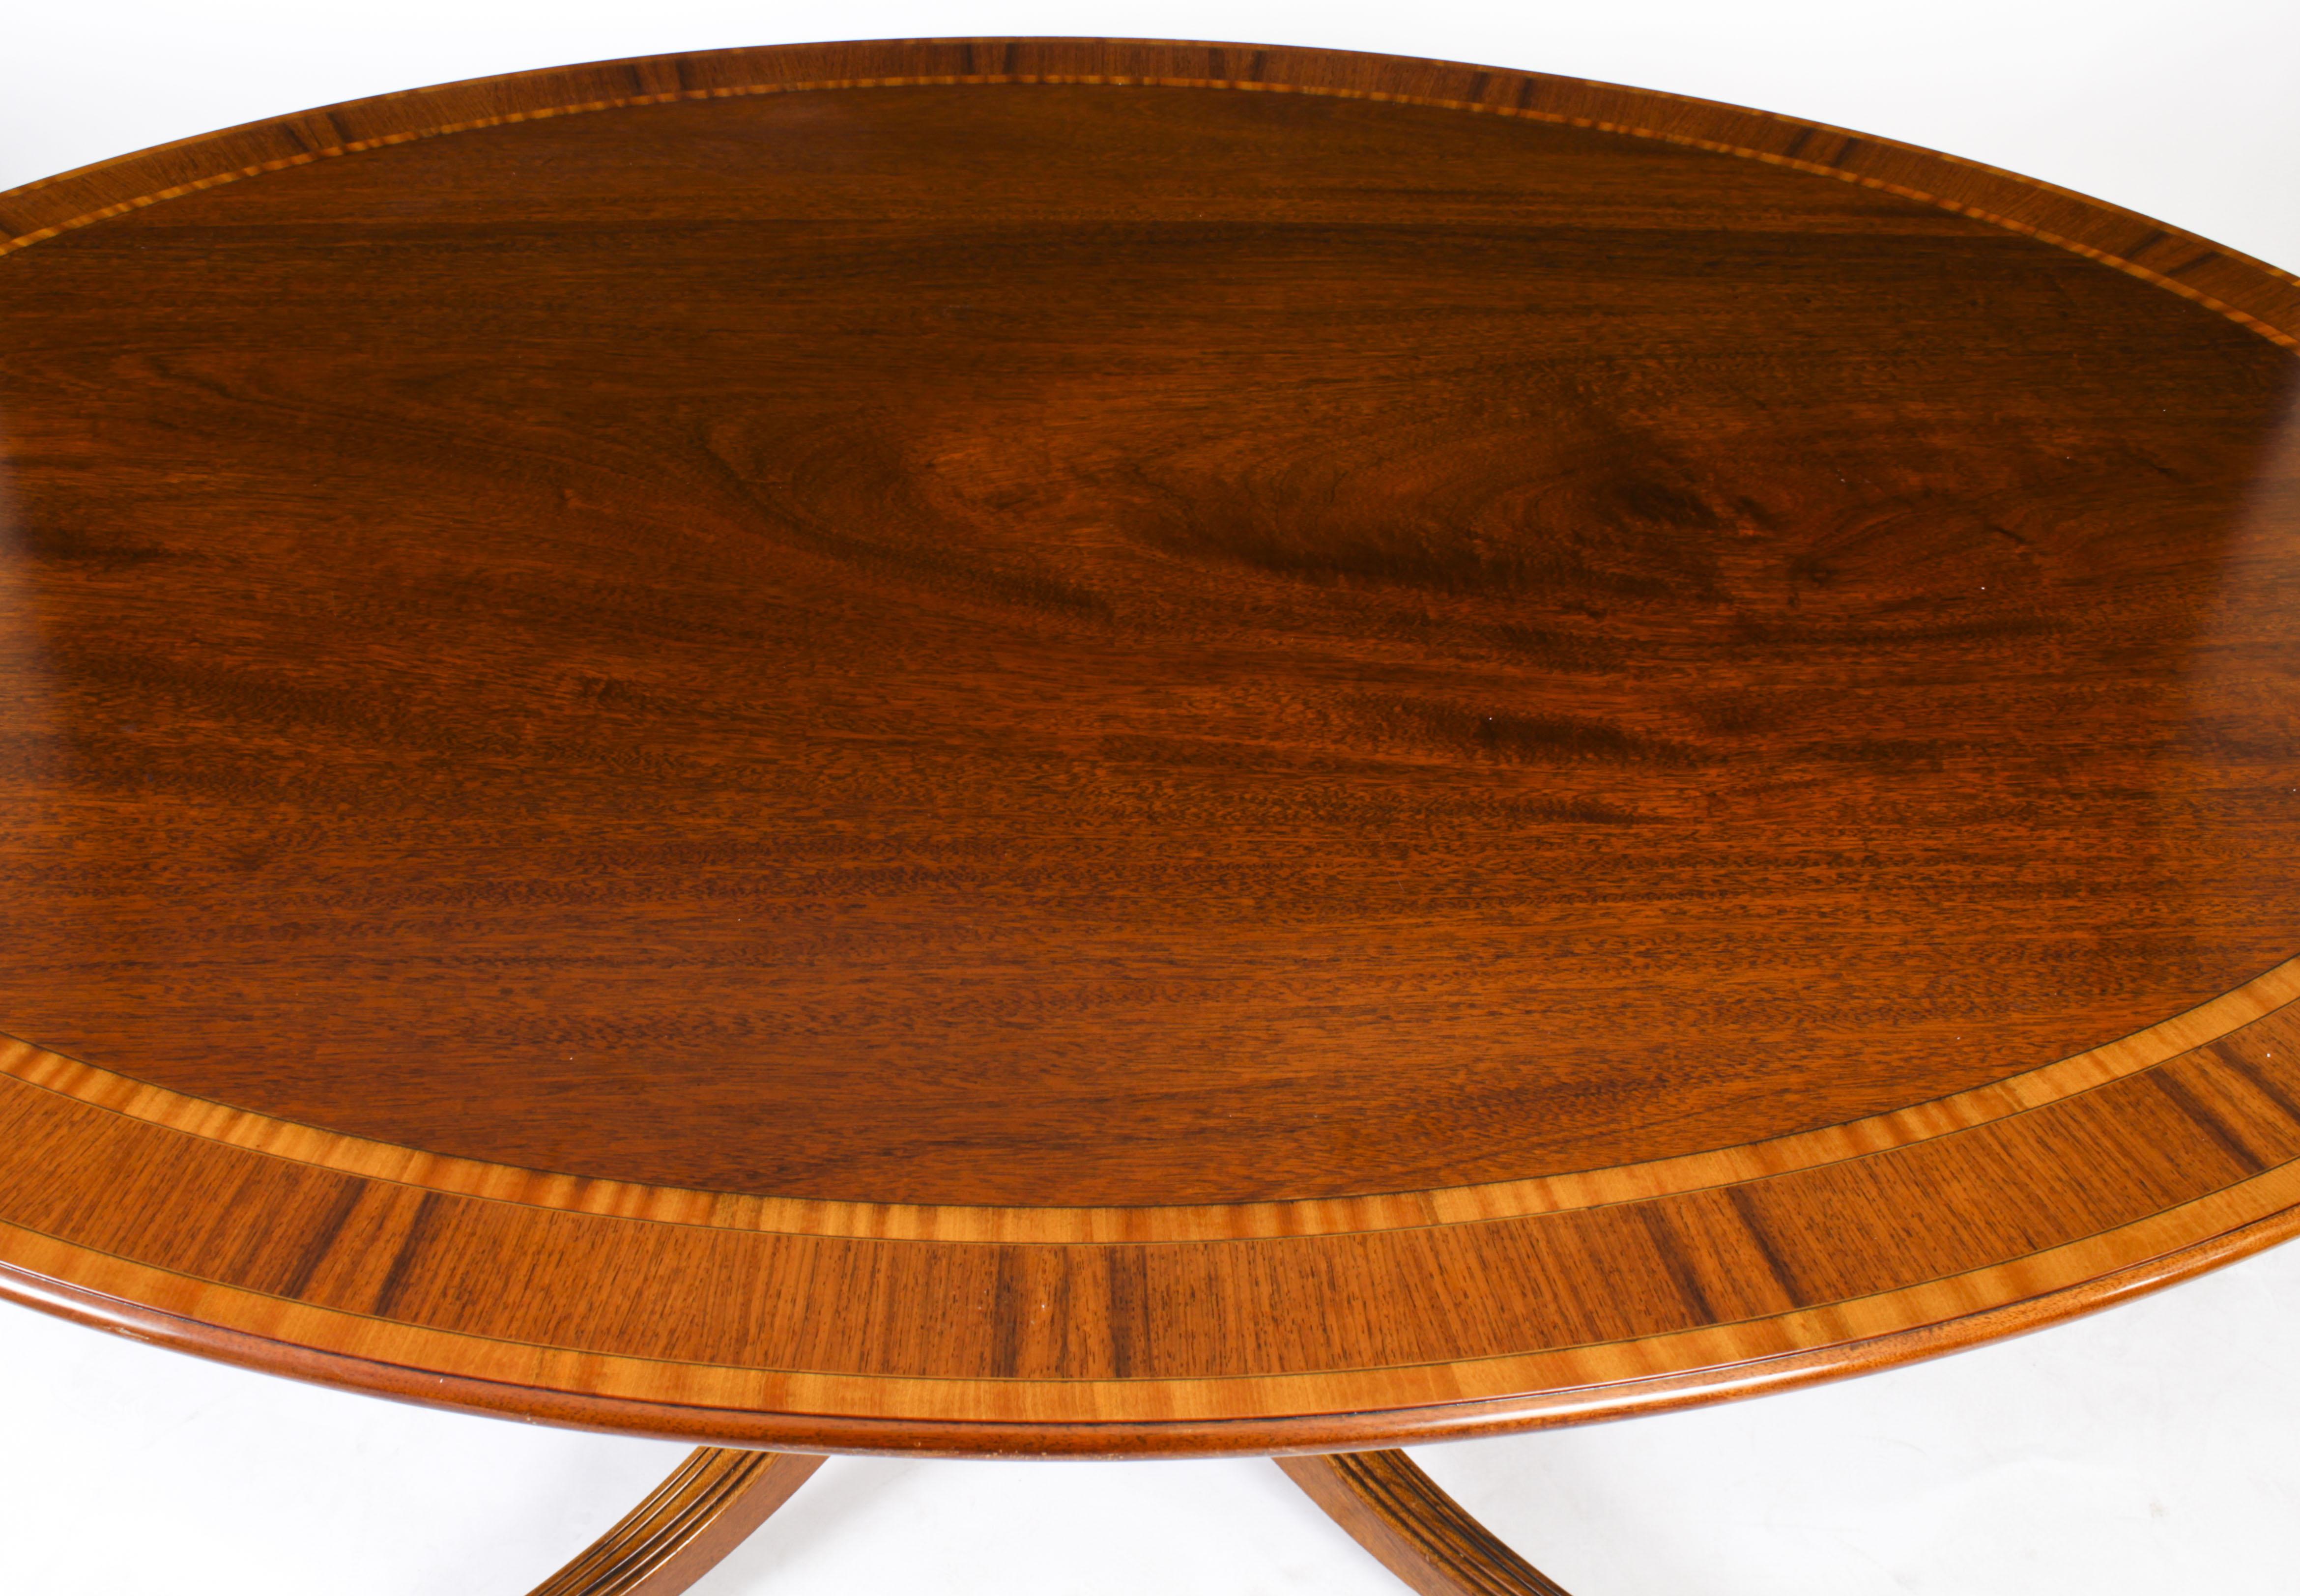 Late 20th Century Vintage Oval Mahogany Dining Table by William Tillman, 20th Century